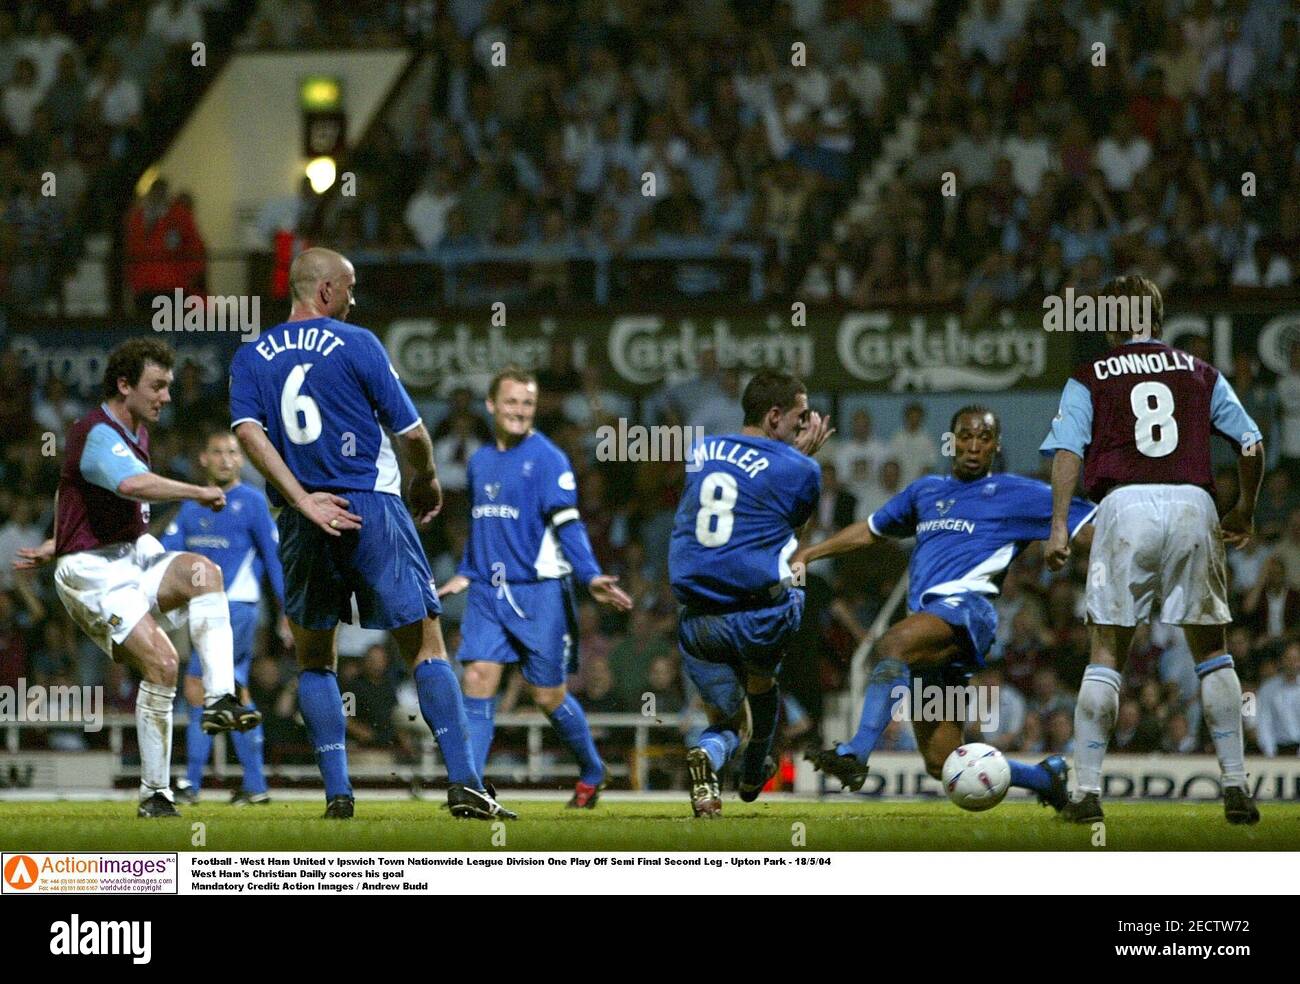 Football - West Ham United v Ipswich Town Nationwide League Division One Play Off Semi Final Second Leg - Upton Park - 18/5/04  West Ham's Christian Dailly scores his goal  Mandatory Credit: Action Images / Andrew Budd Stock Photo